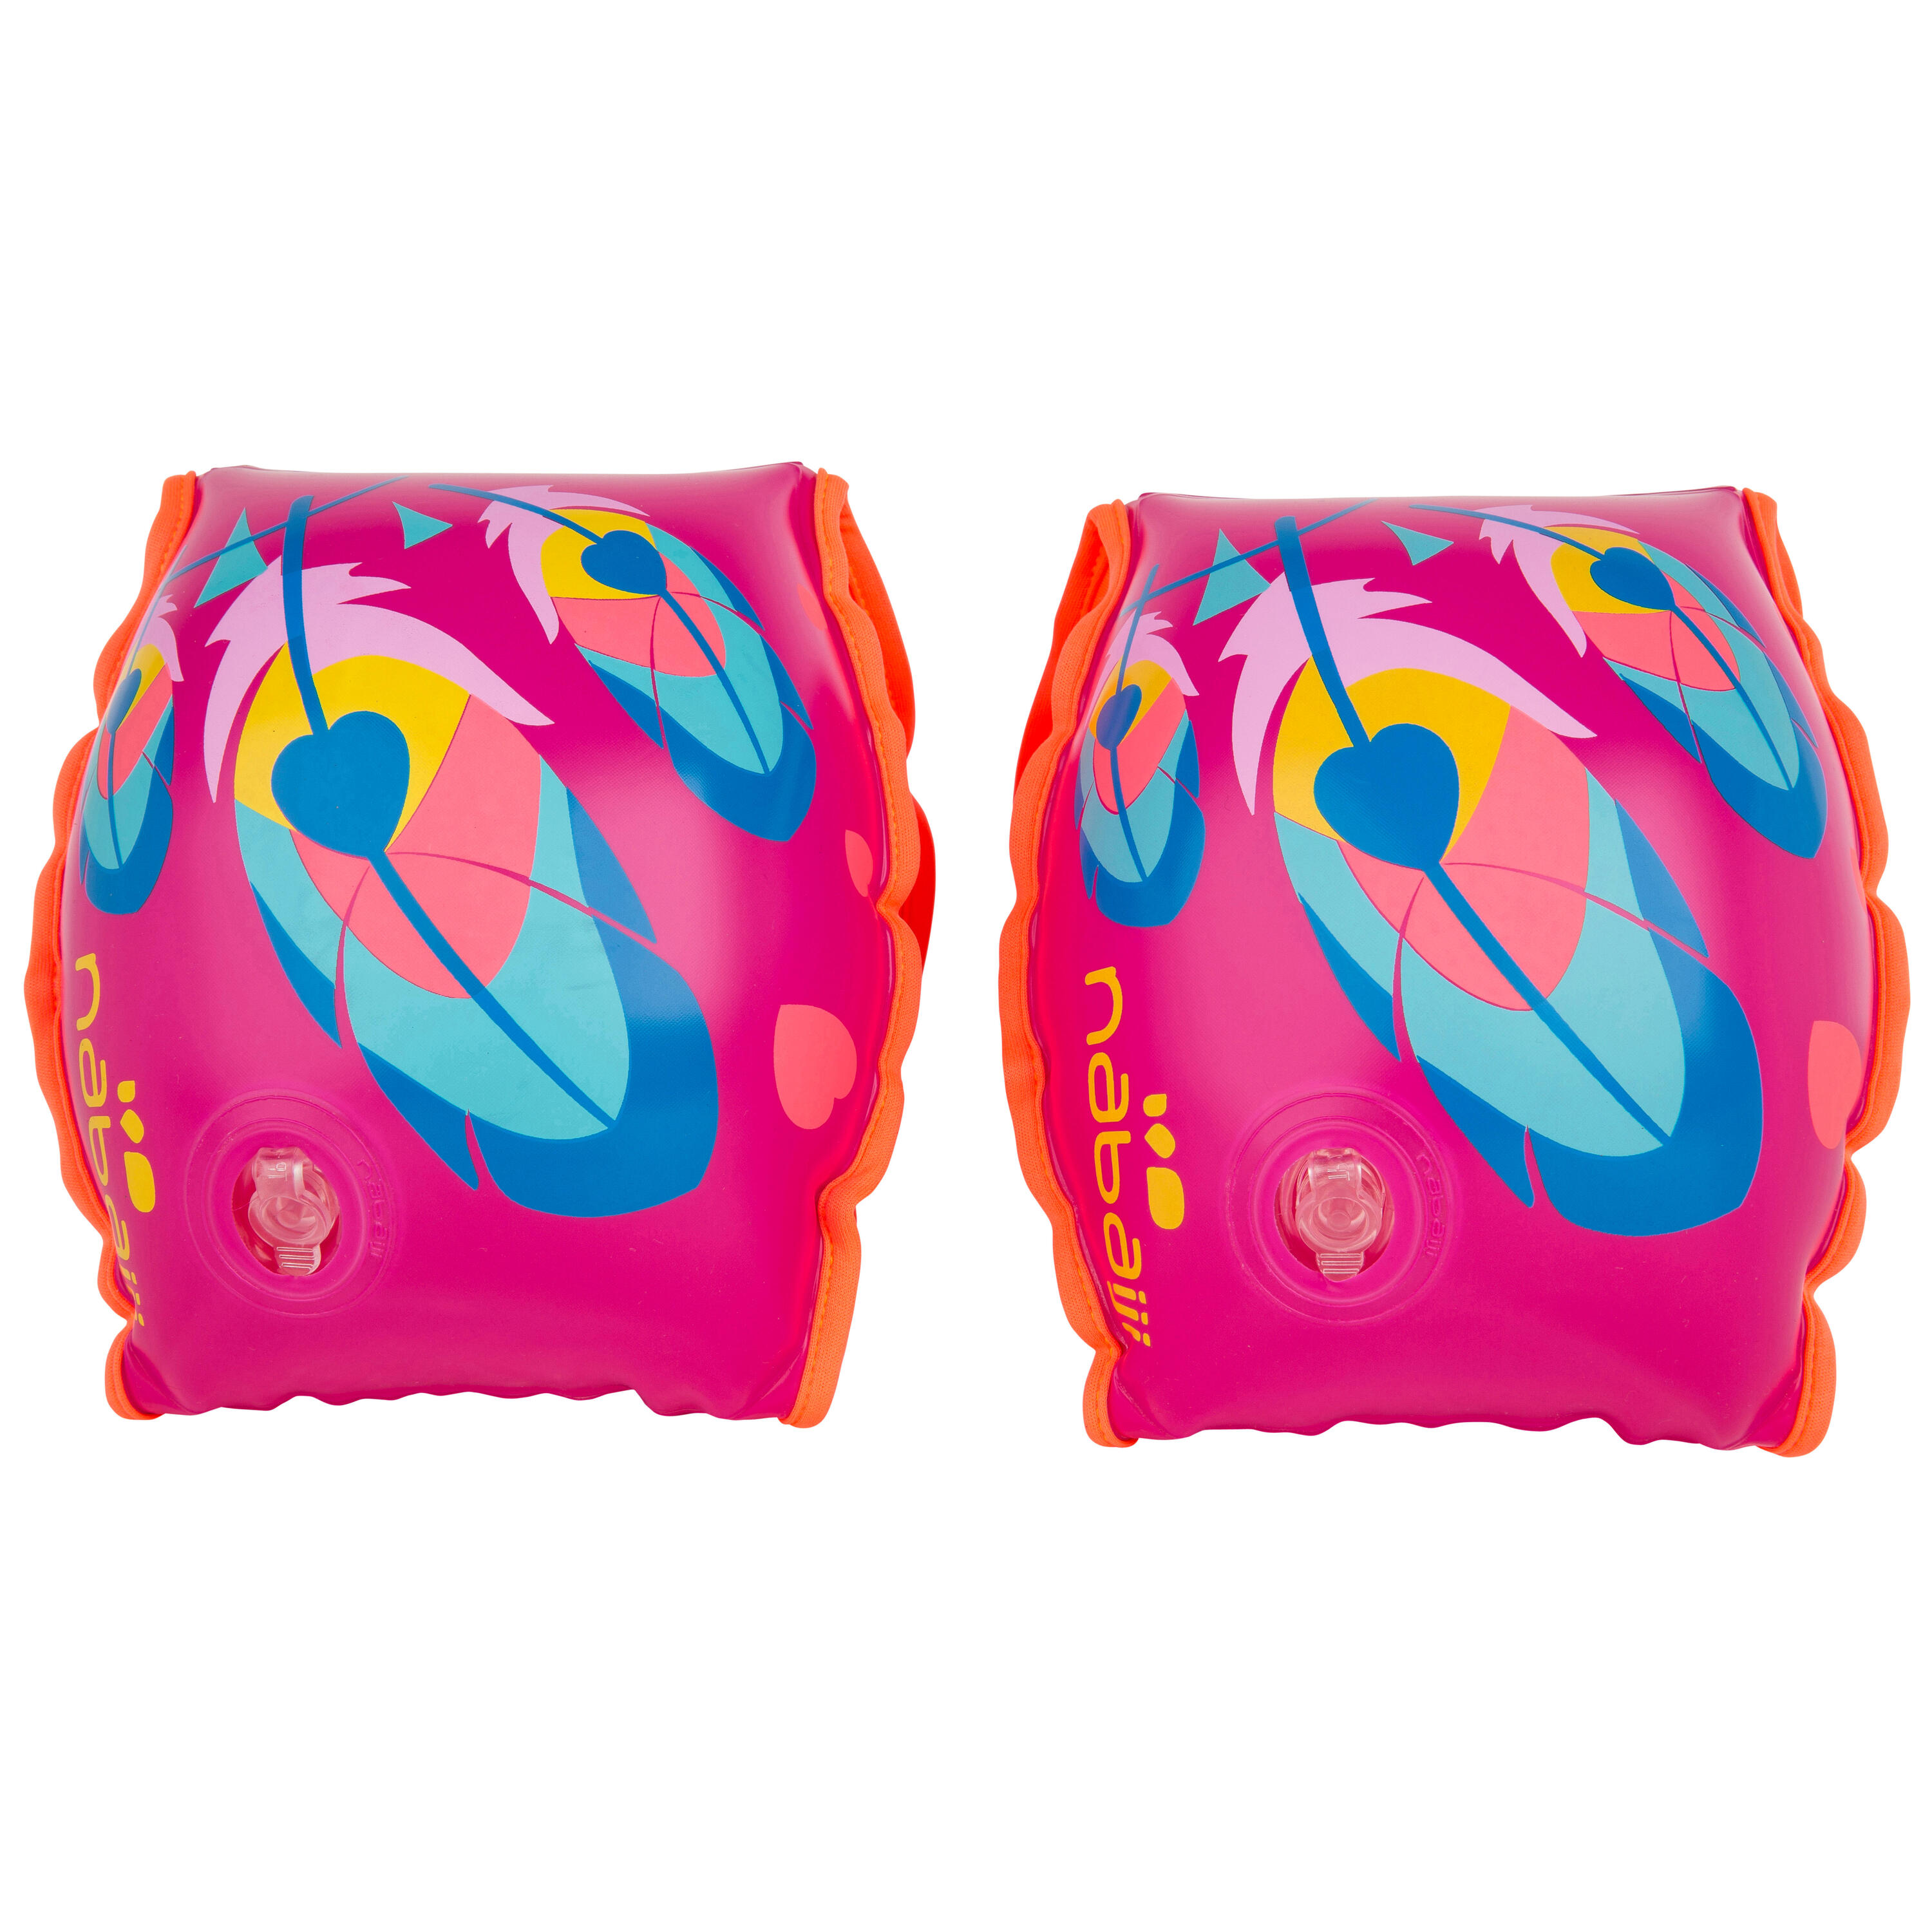 NABAIJI Soft Armbands With Two Inflatable Sections With "FAZ" Print 15 To 30kg - Pink